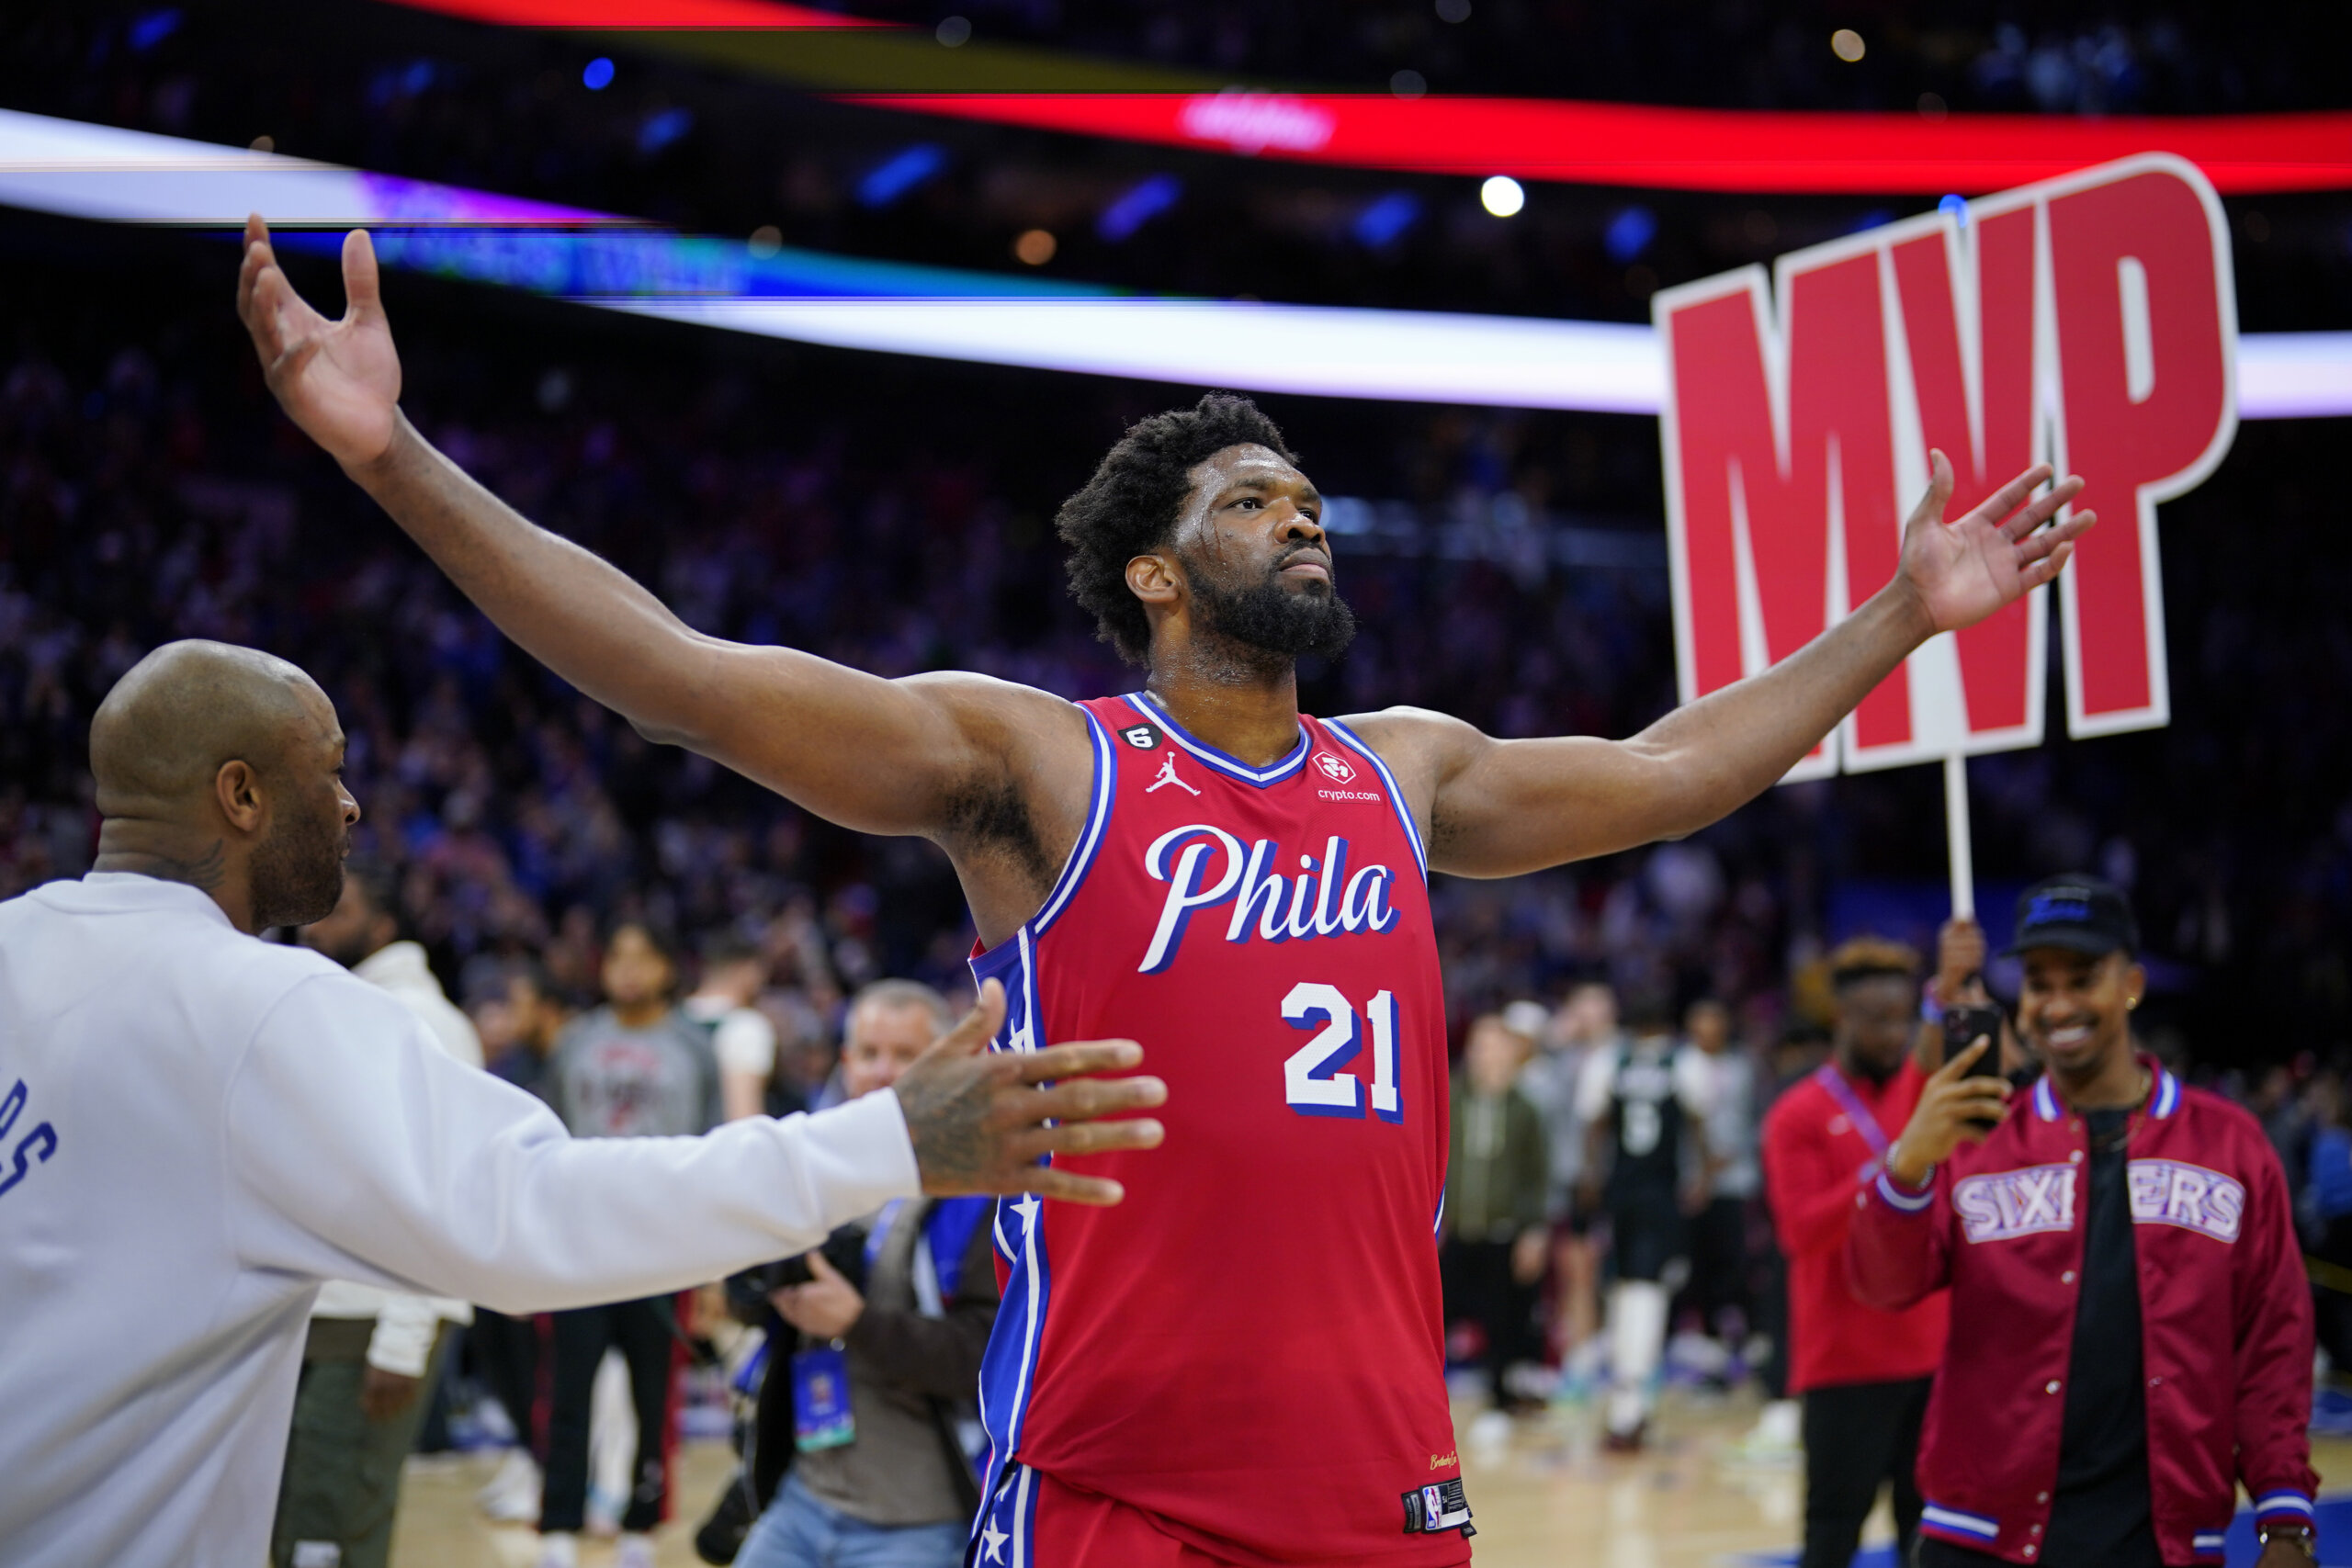 Trust the Process: What Businesses Can Learn from the 76ers Tanking